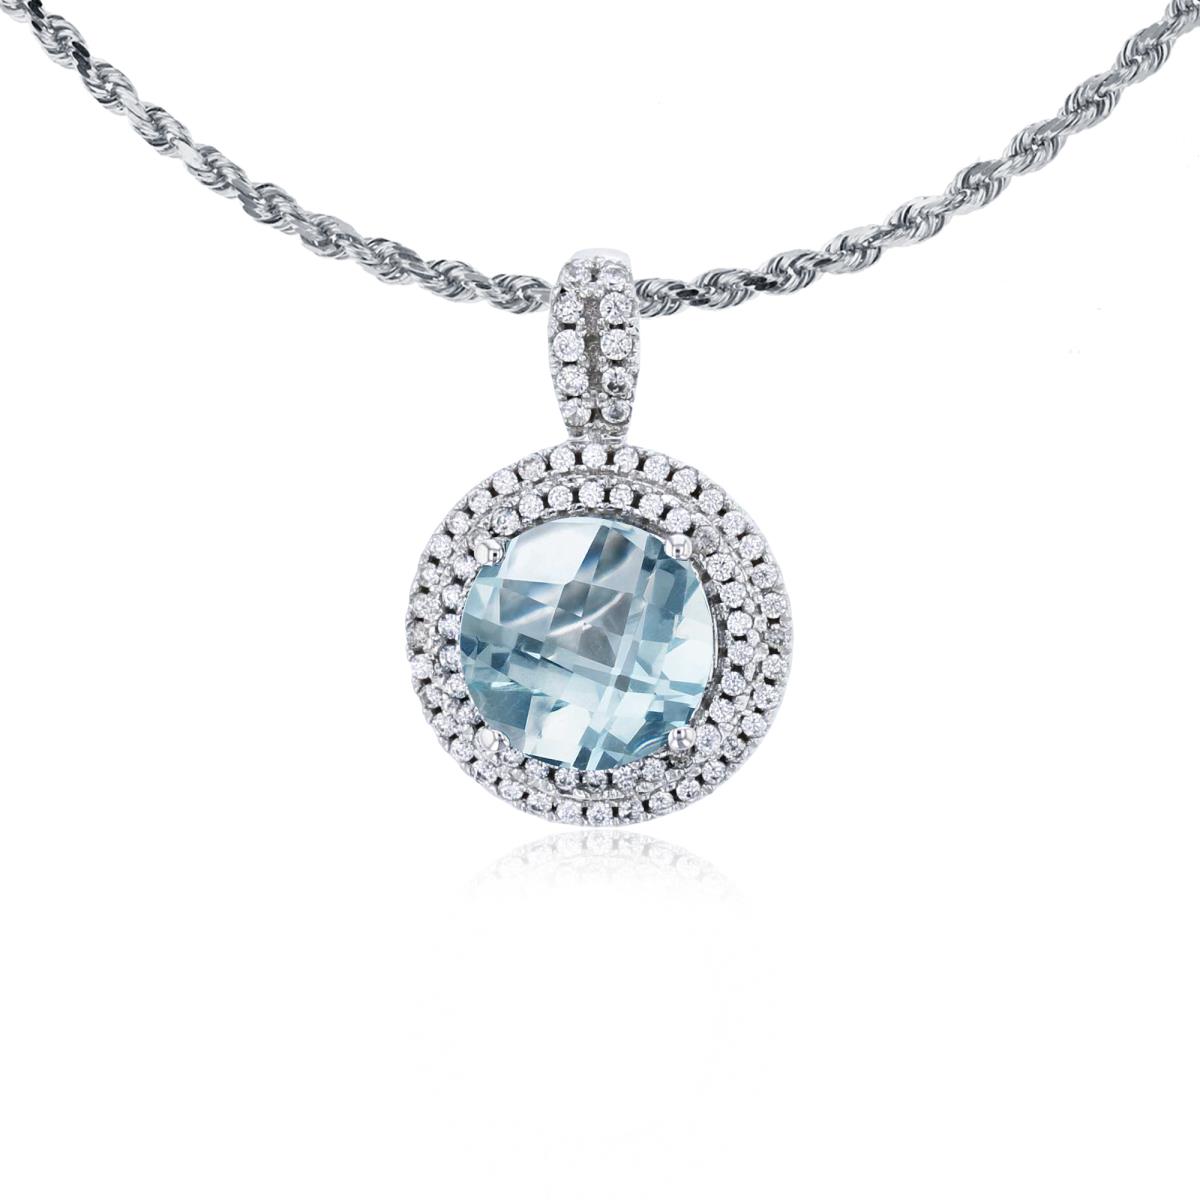 10K White Gold 7mm Round Aquamarine & 0.25 CTTW Diamonds Double Halo 18" Rope Chain Necklace